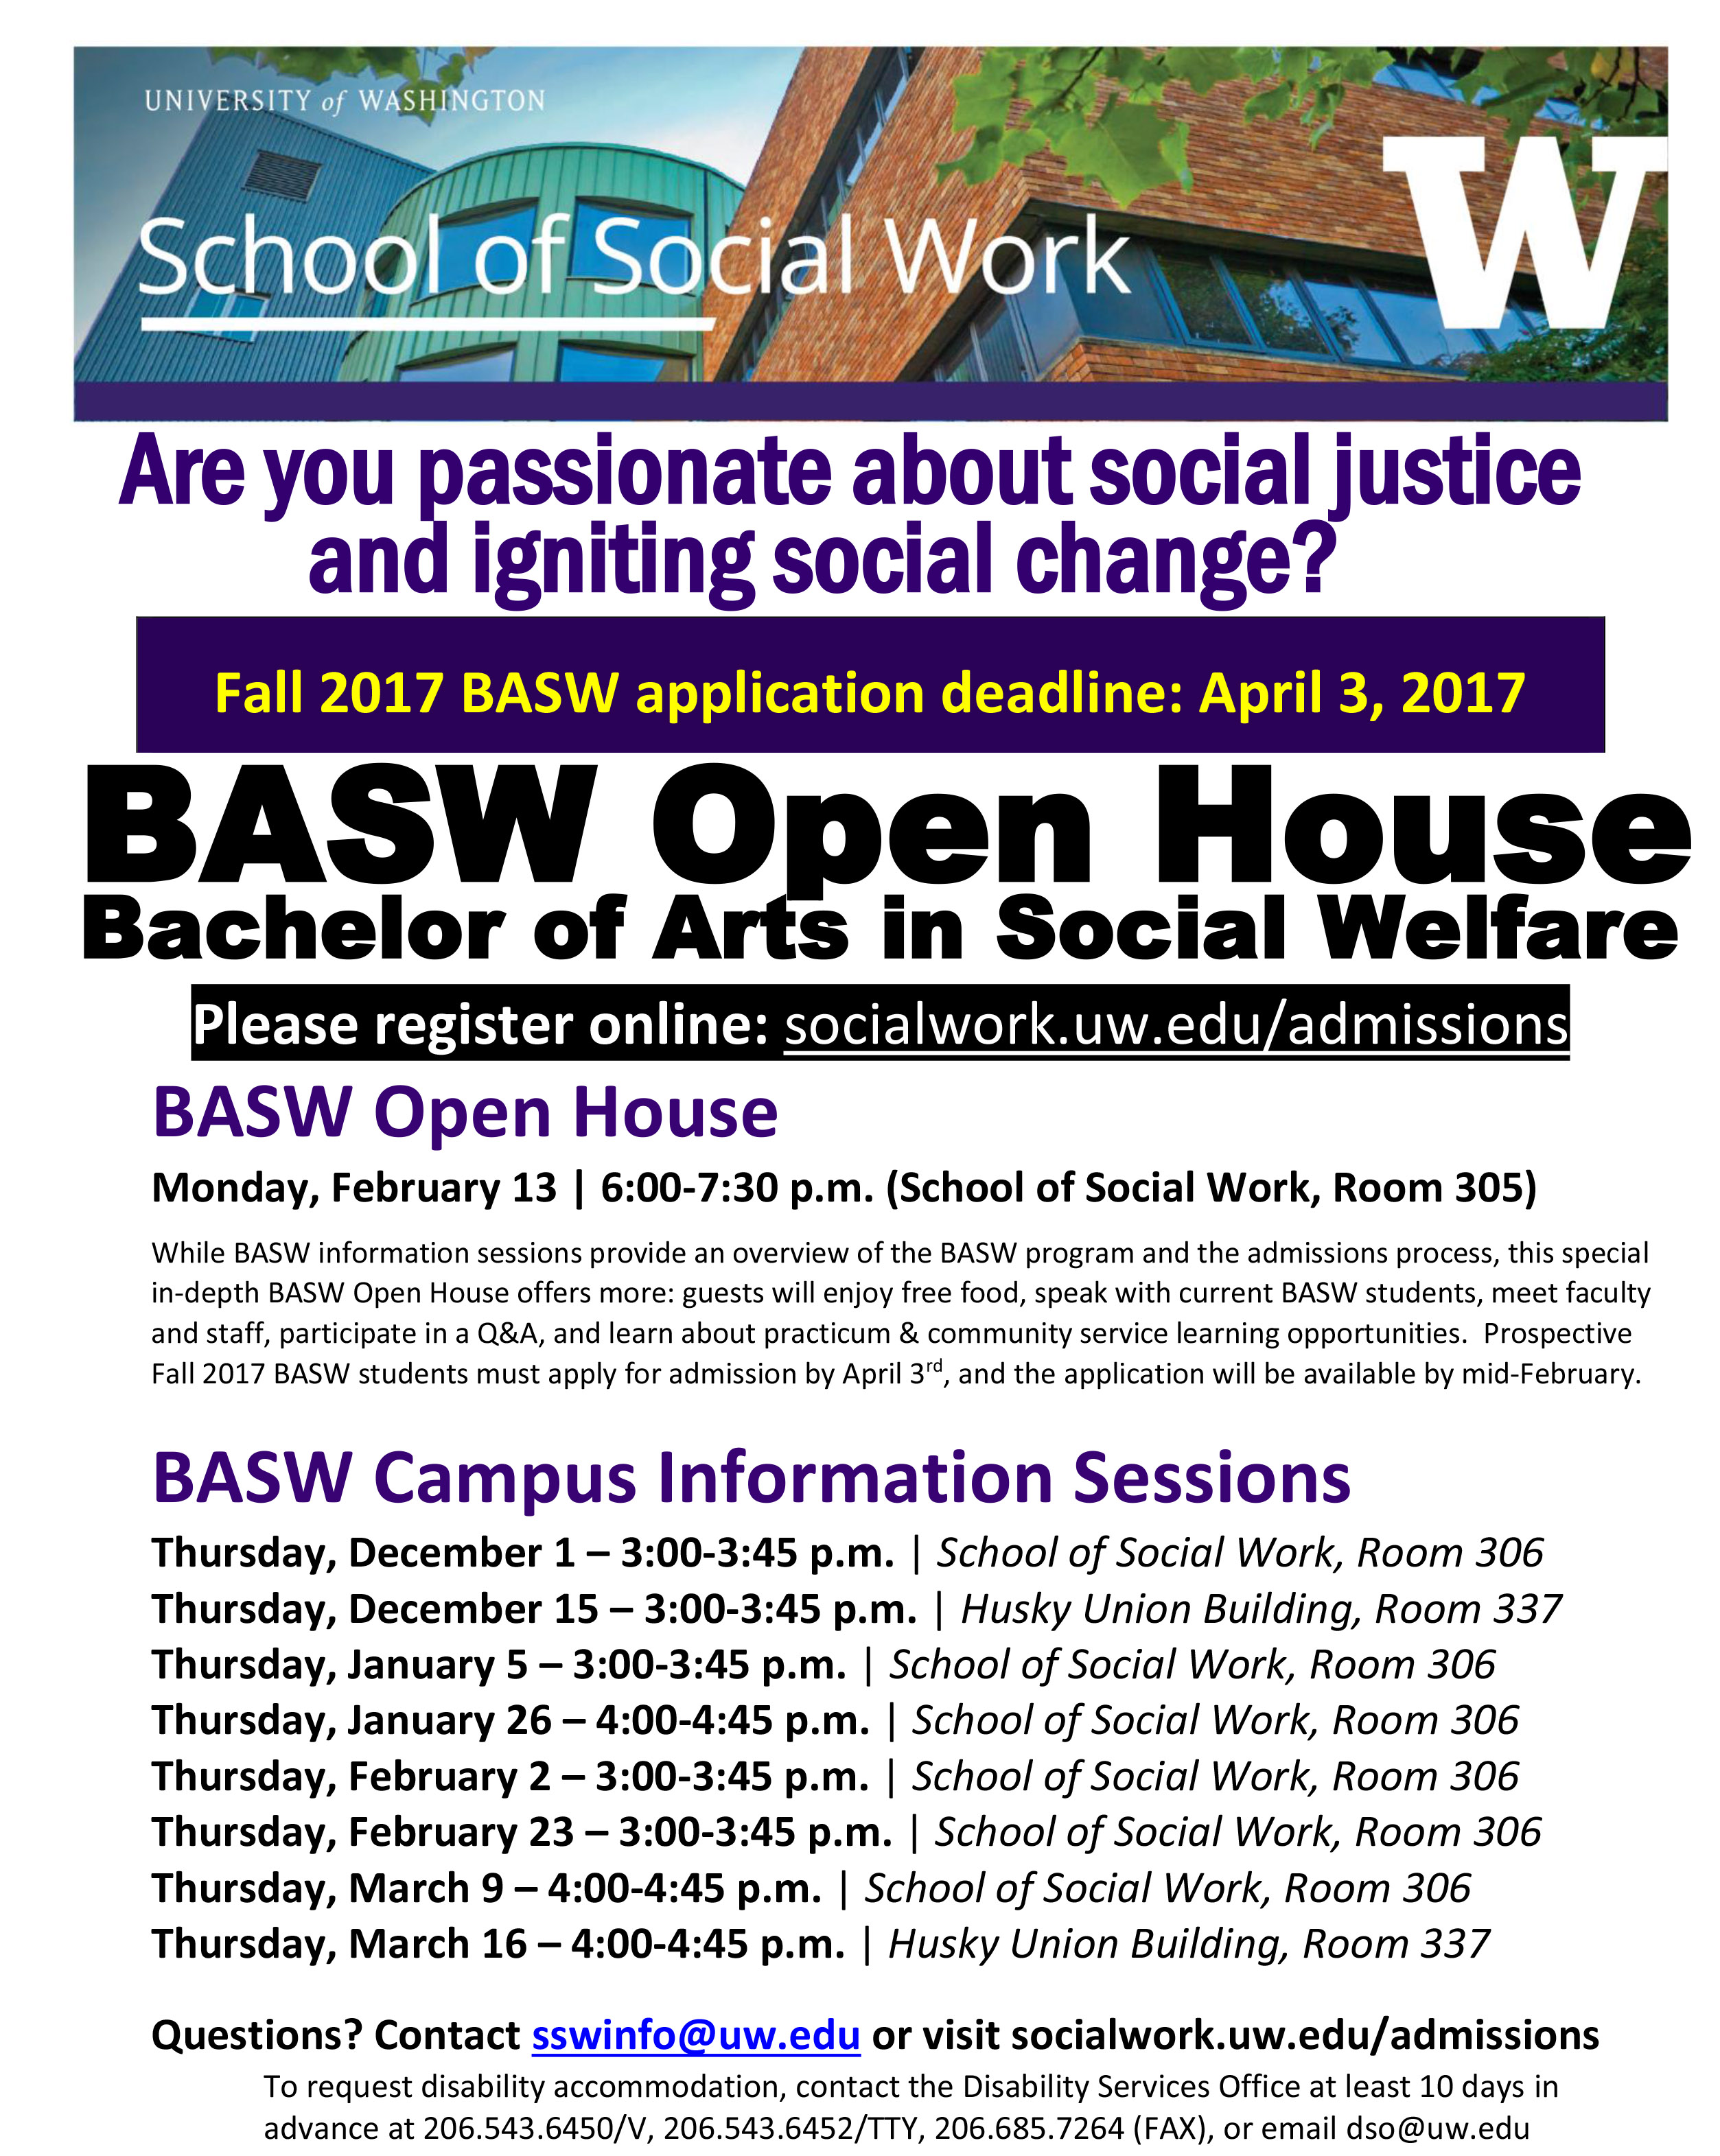 BASW Open House and Info Sessions flyer